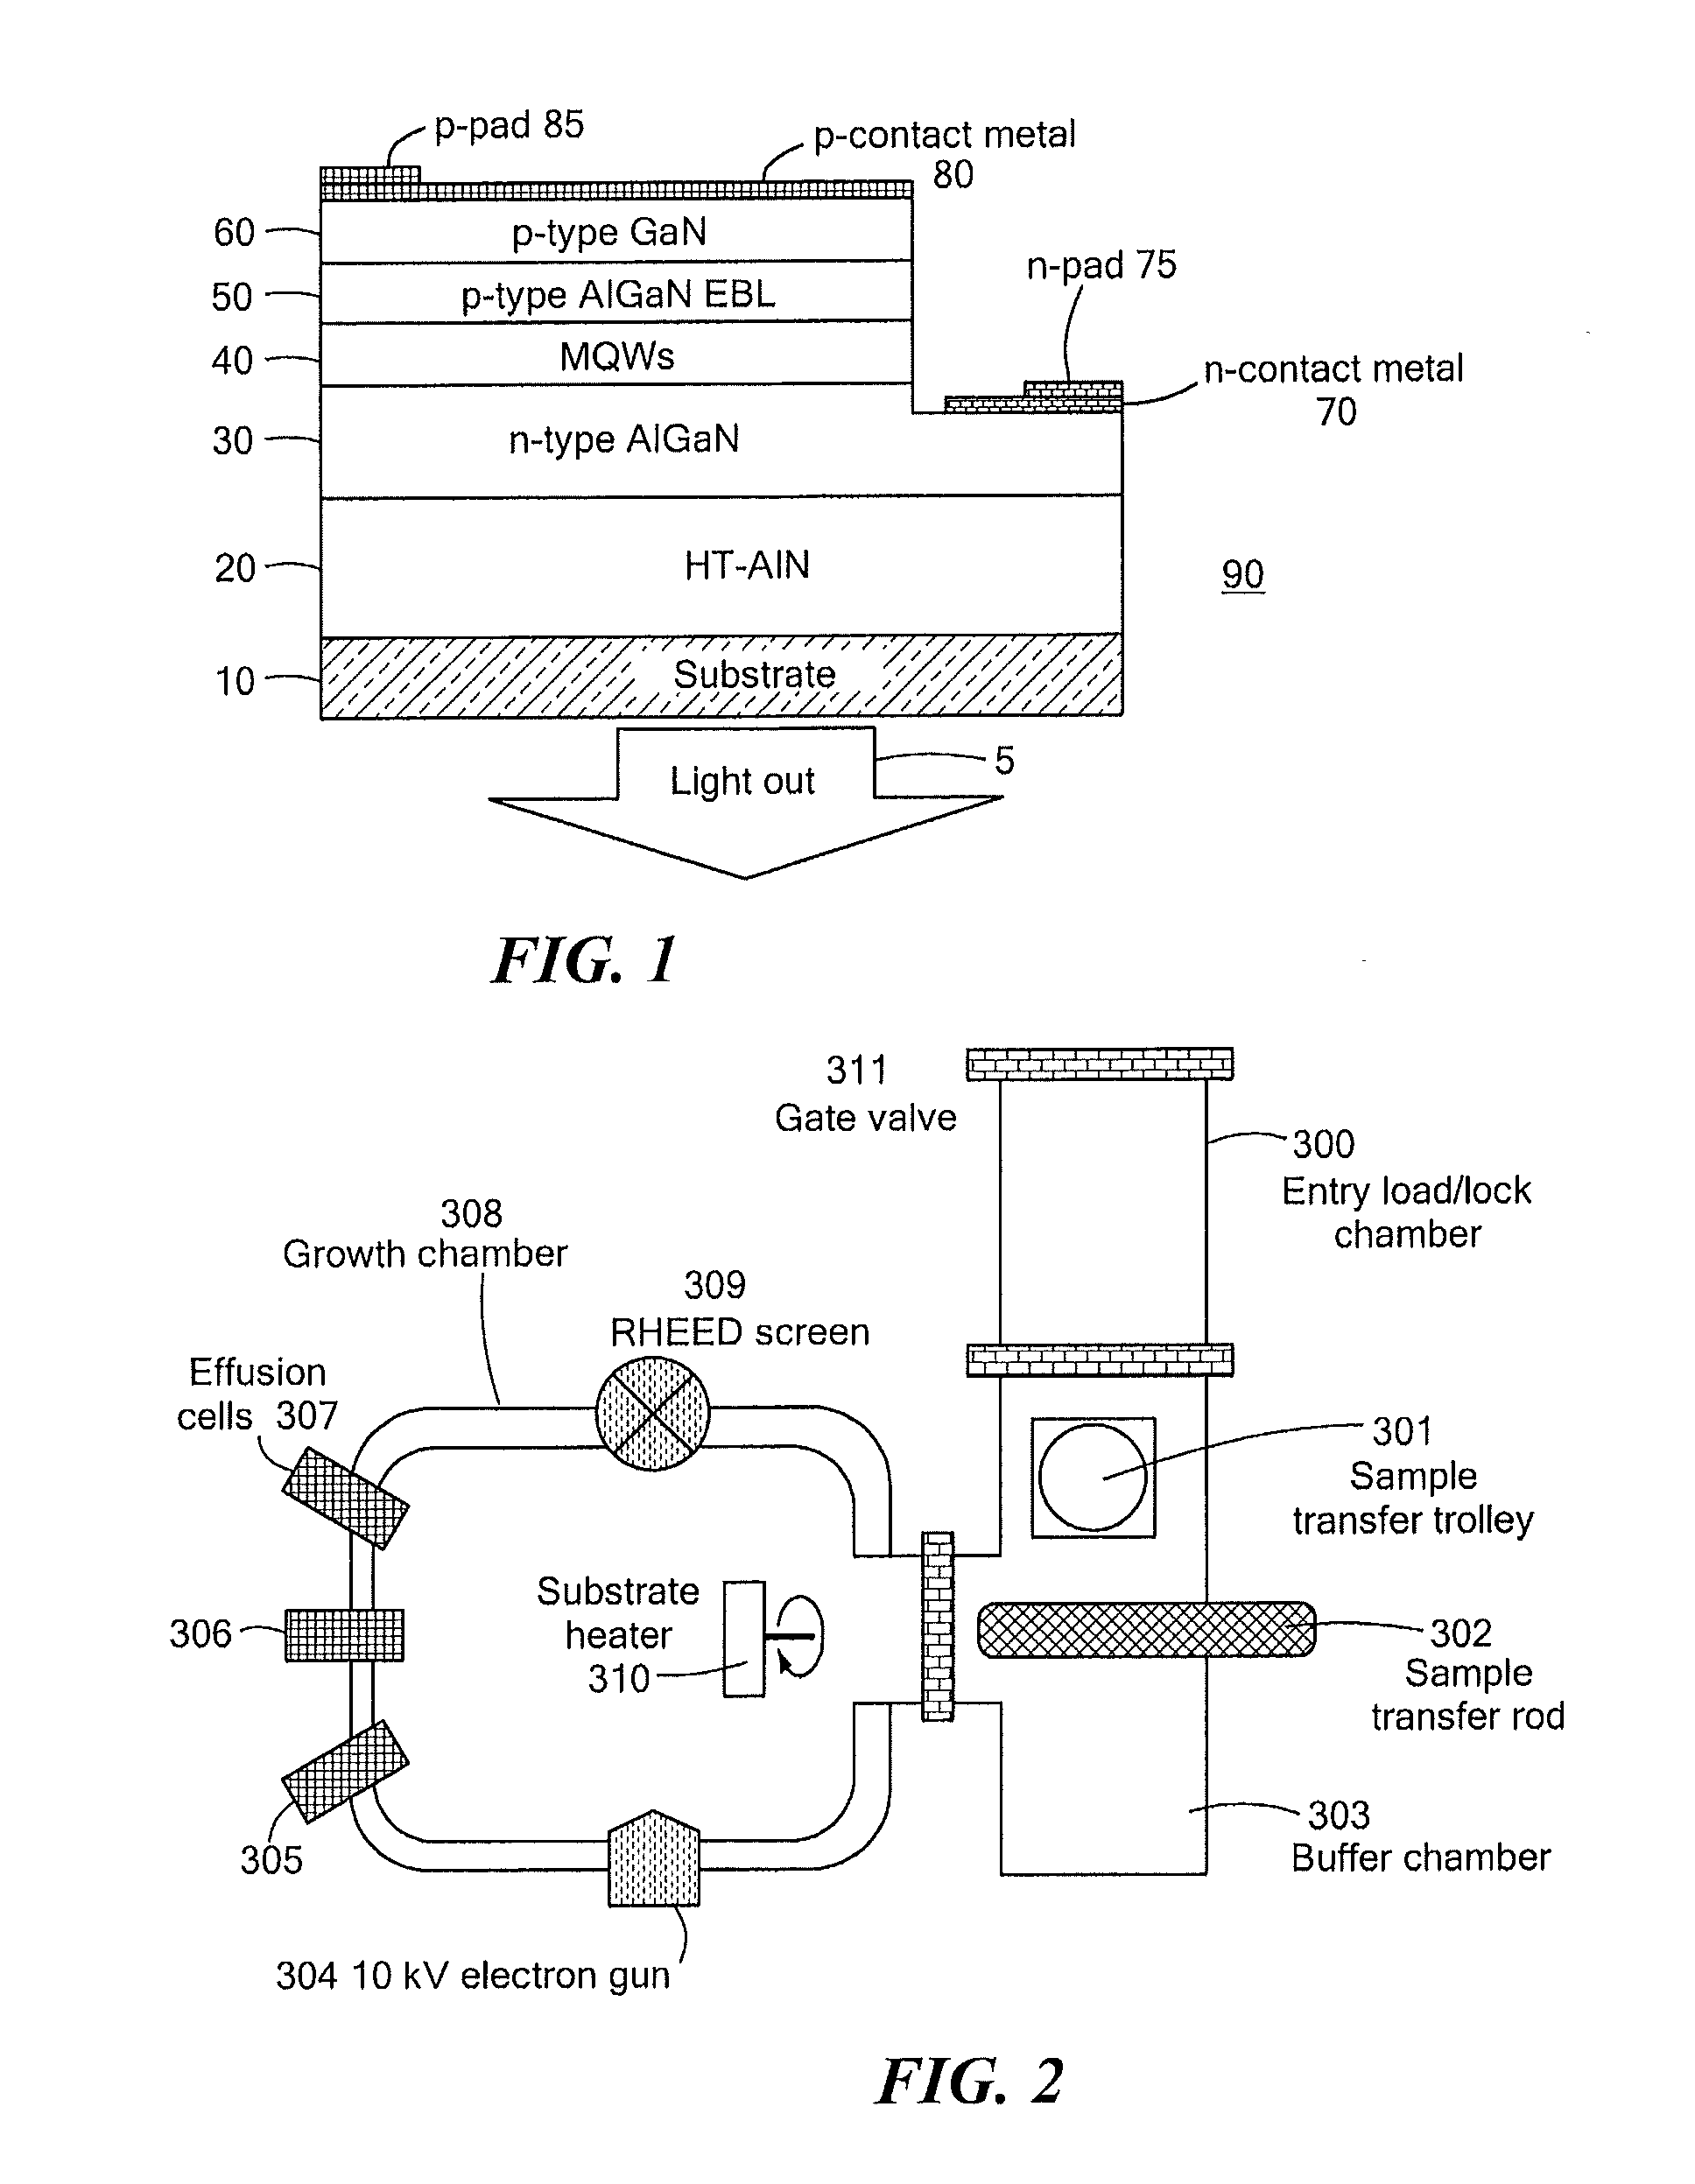 High efficiency ultraviolet light emitting diode with band structure potential fluctuations